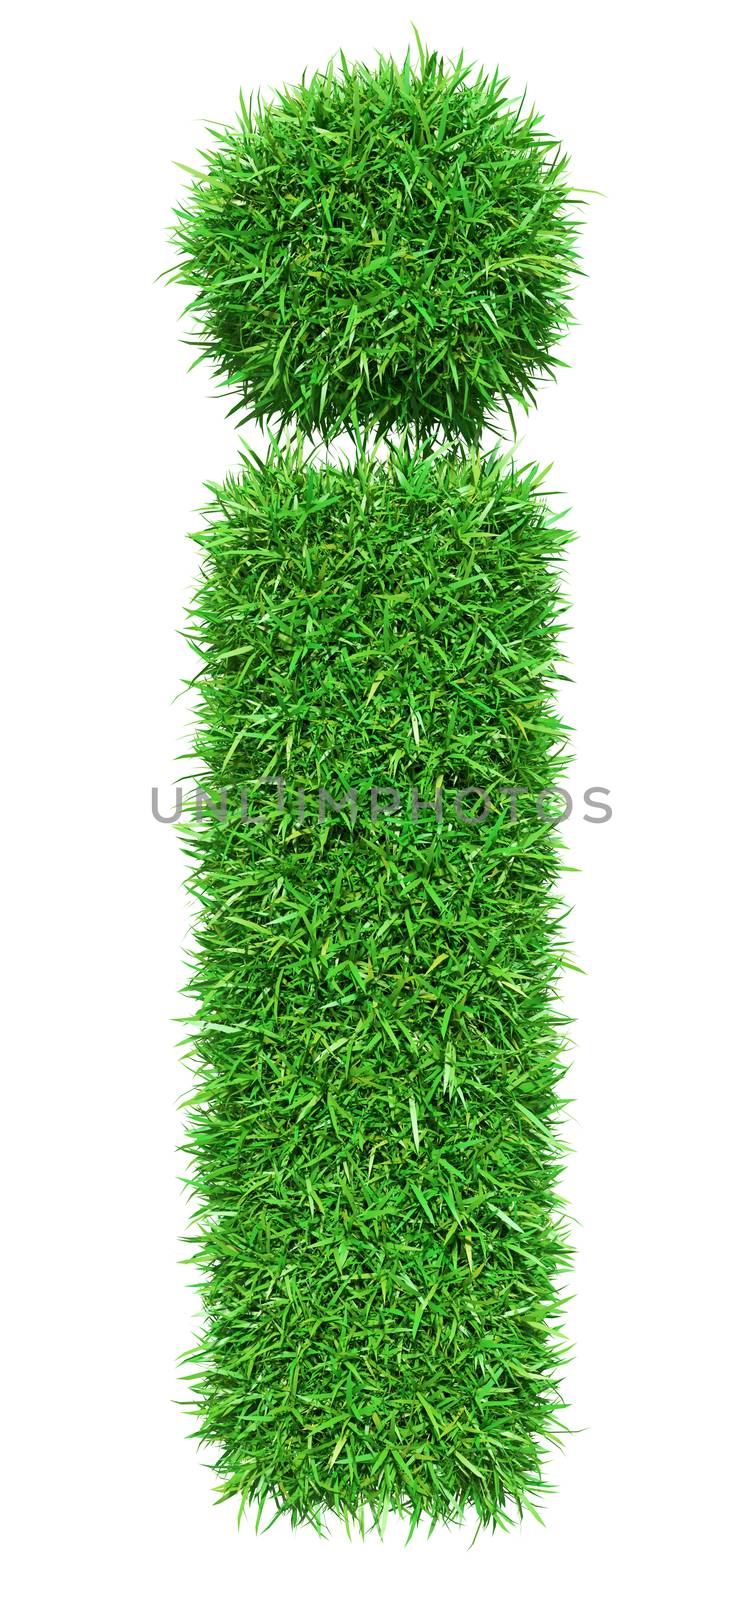 Green Grass Letter I by cherezoff